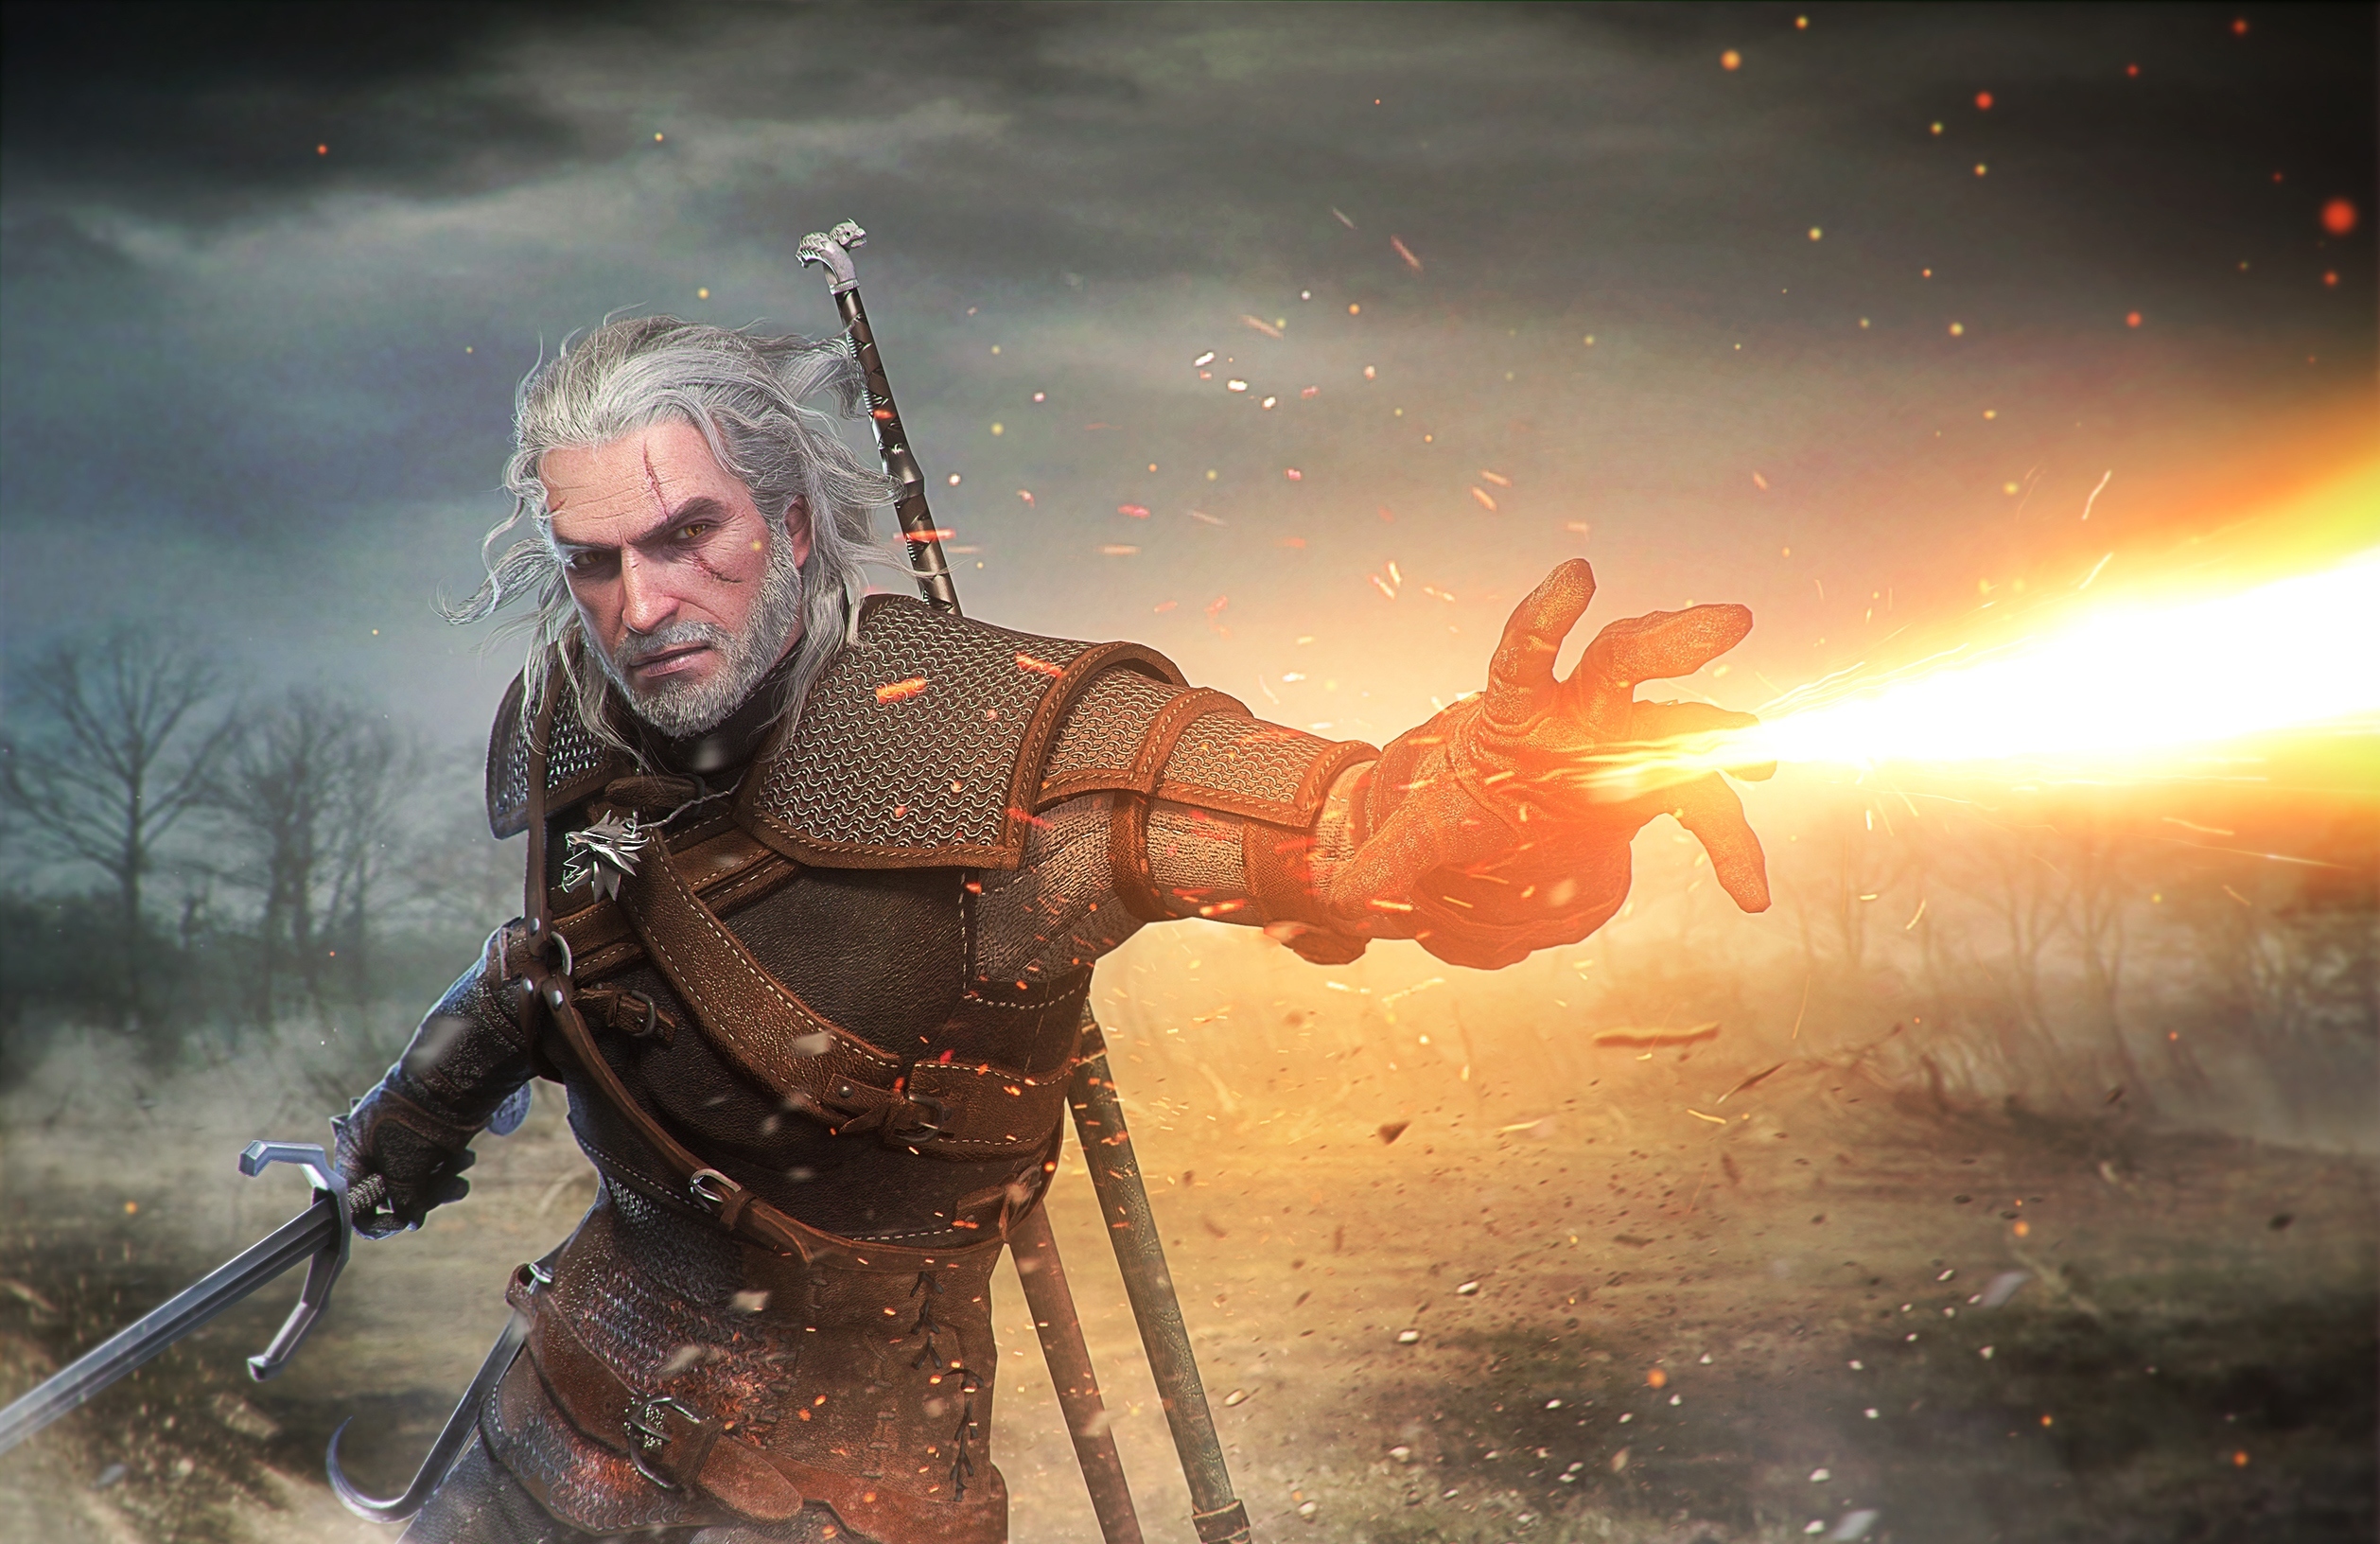 Fictional Character, Video Games, The Witcher, The Witcher 3 Wild